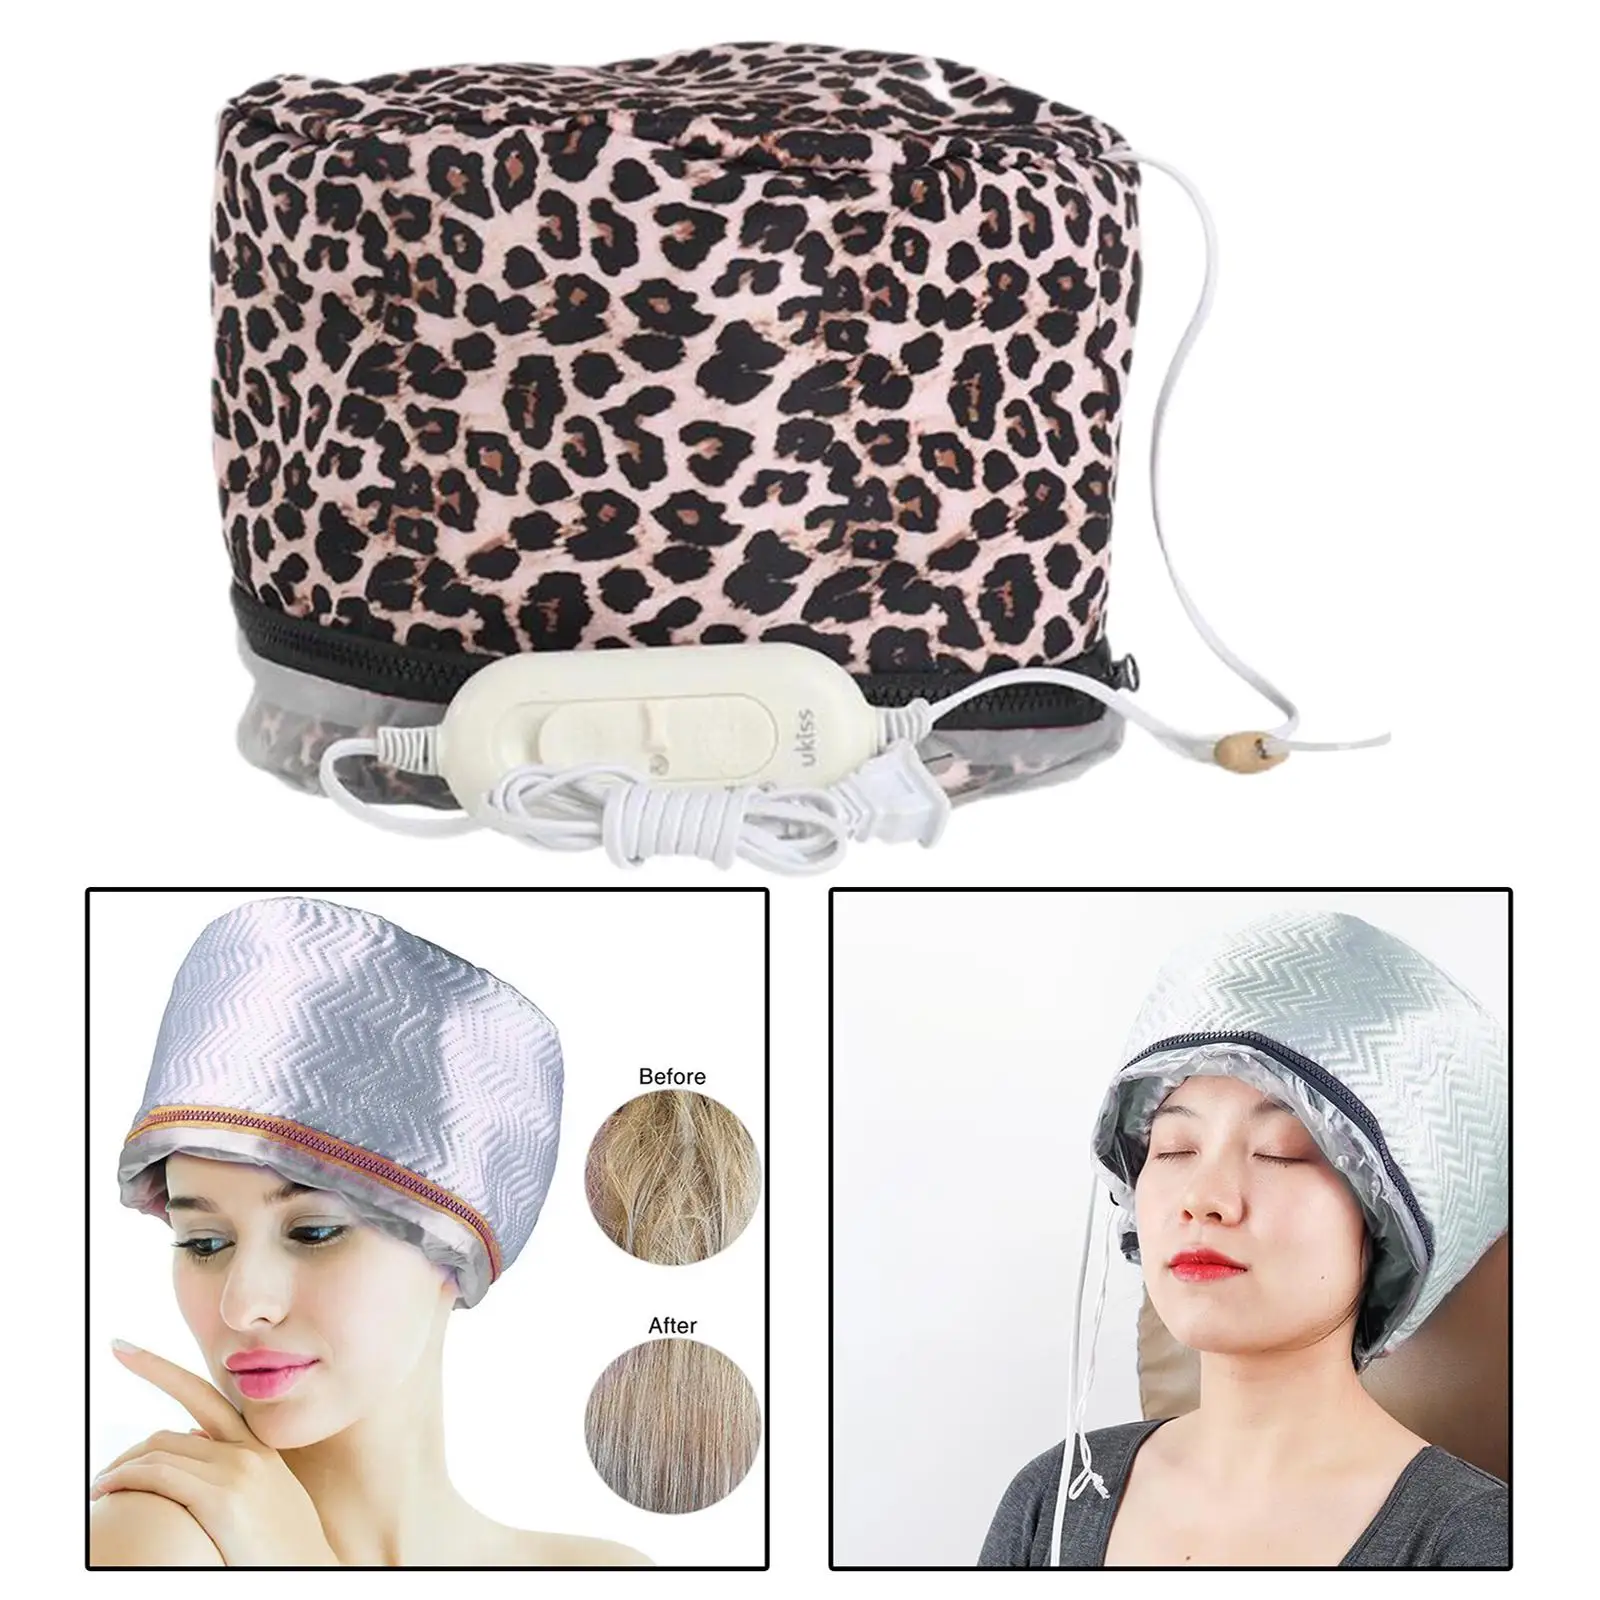  Care Steamer Hat Deep Conditioning Moisturize Waterproof Thermal Caps , Adjustable Temperature Control Home Use, US